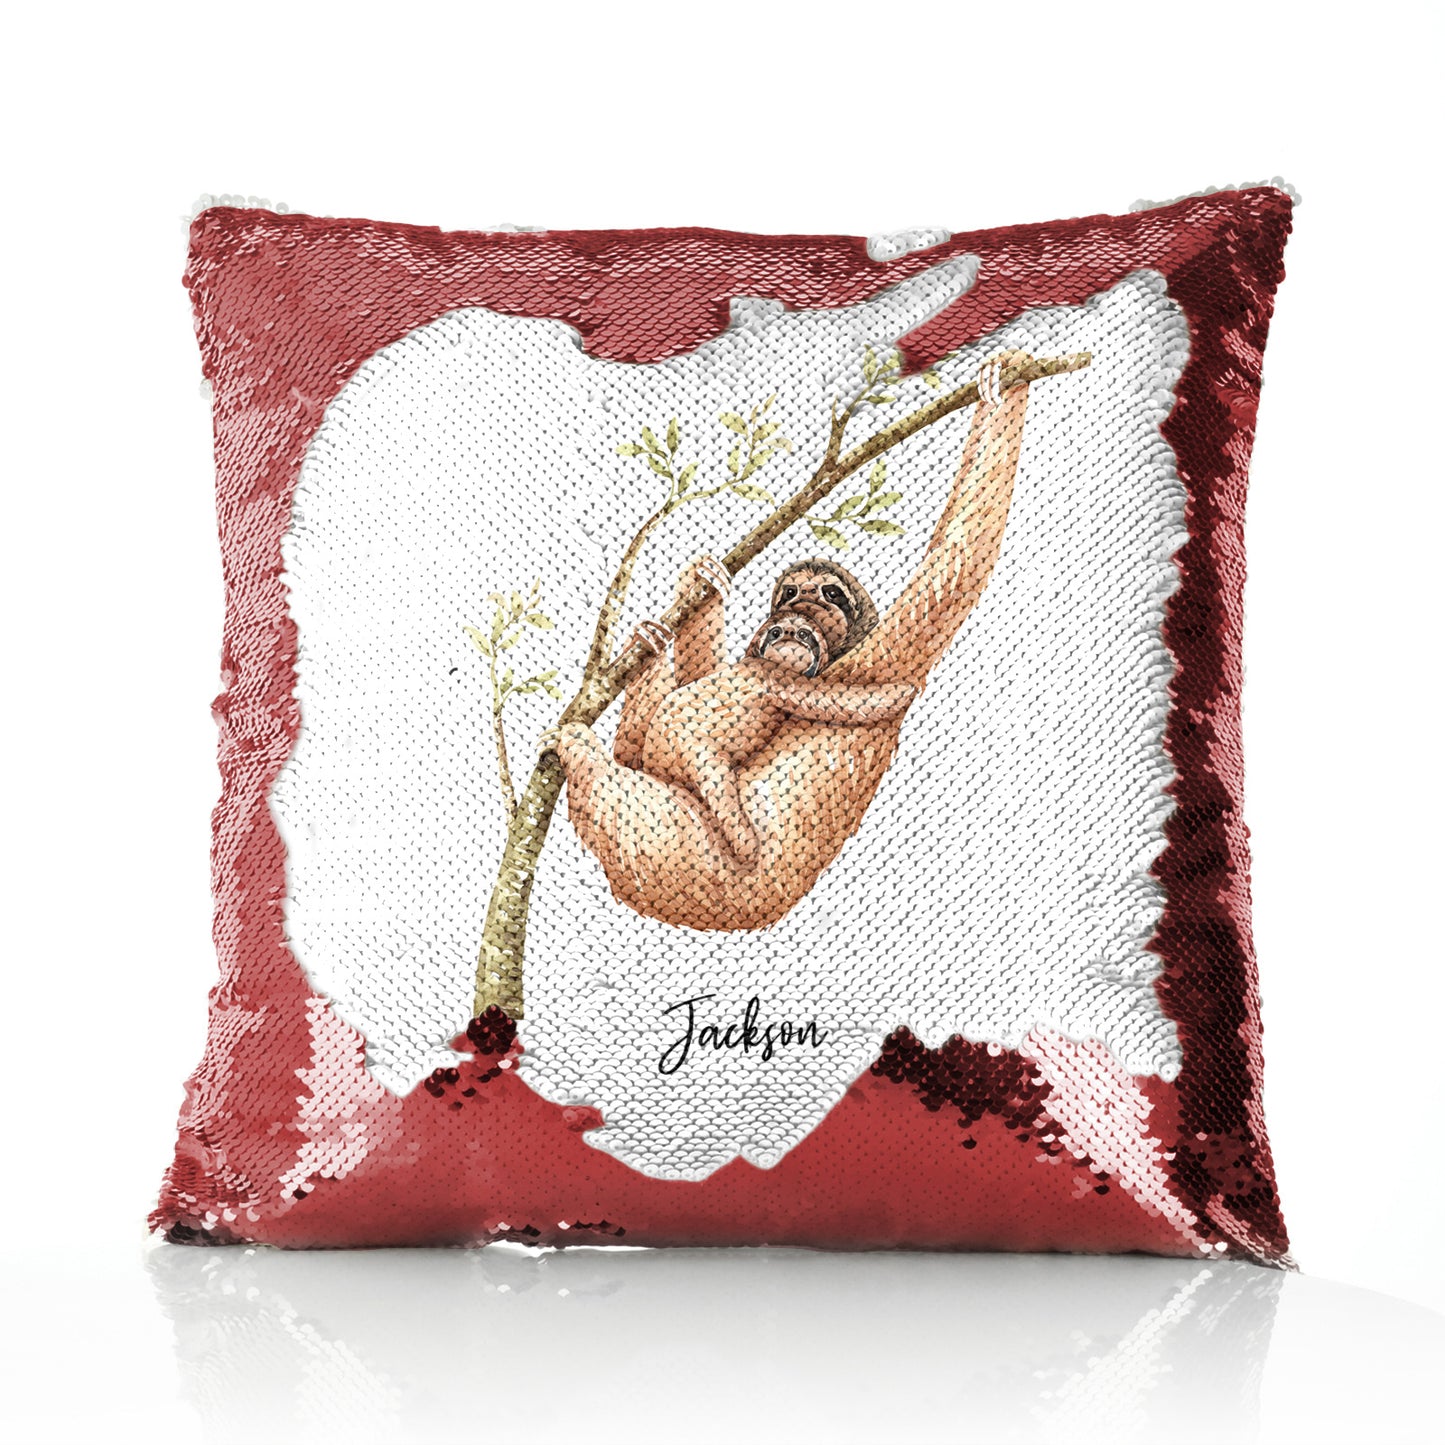 Personalised Sequin Cushion with Welcoming Text and Climbing Mum and Baby Sloths